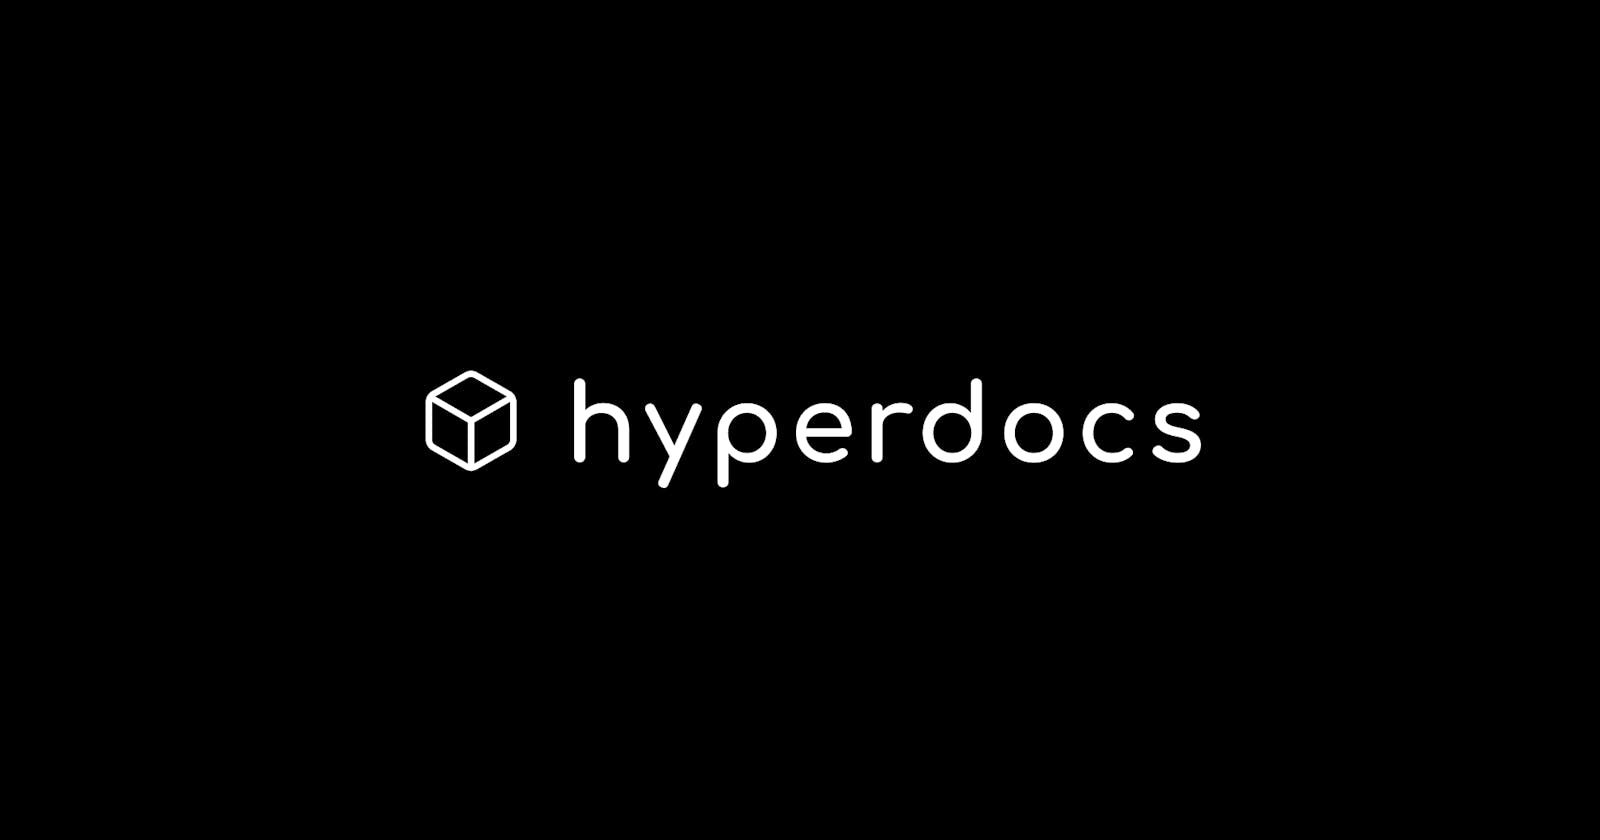 Introducing Hyperdocs - The simplest way to build docs for your project.